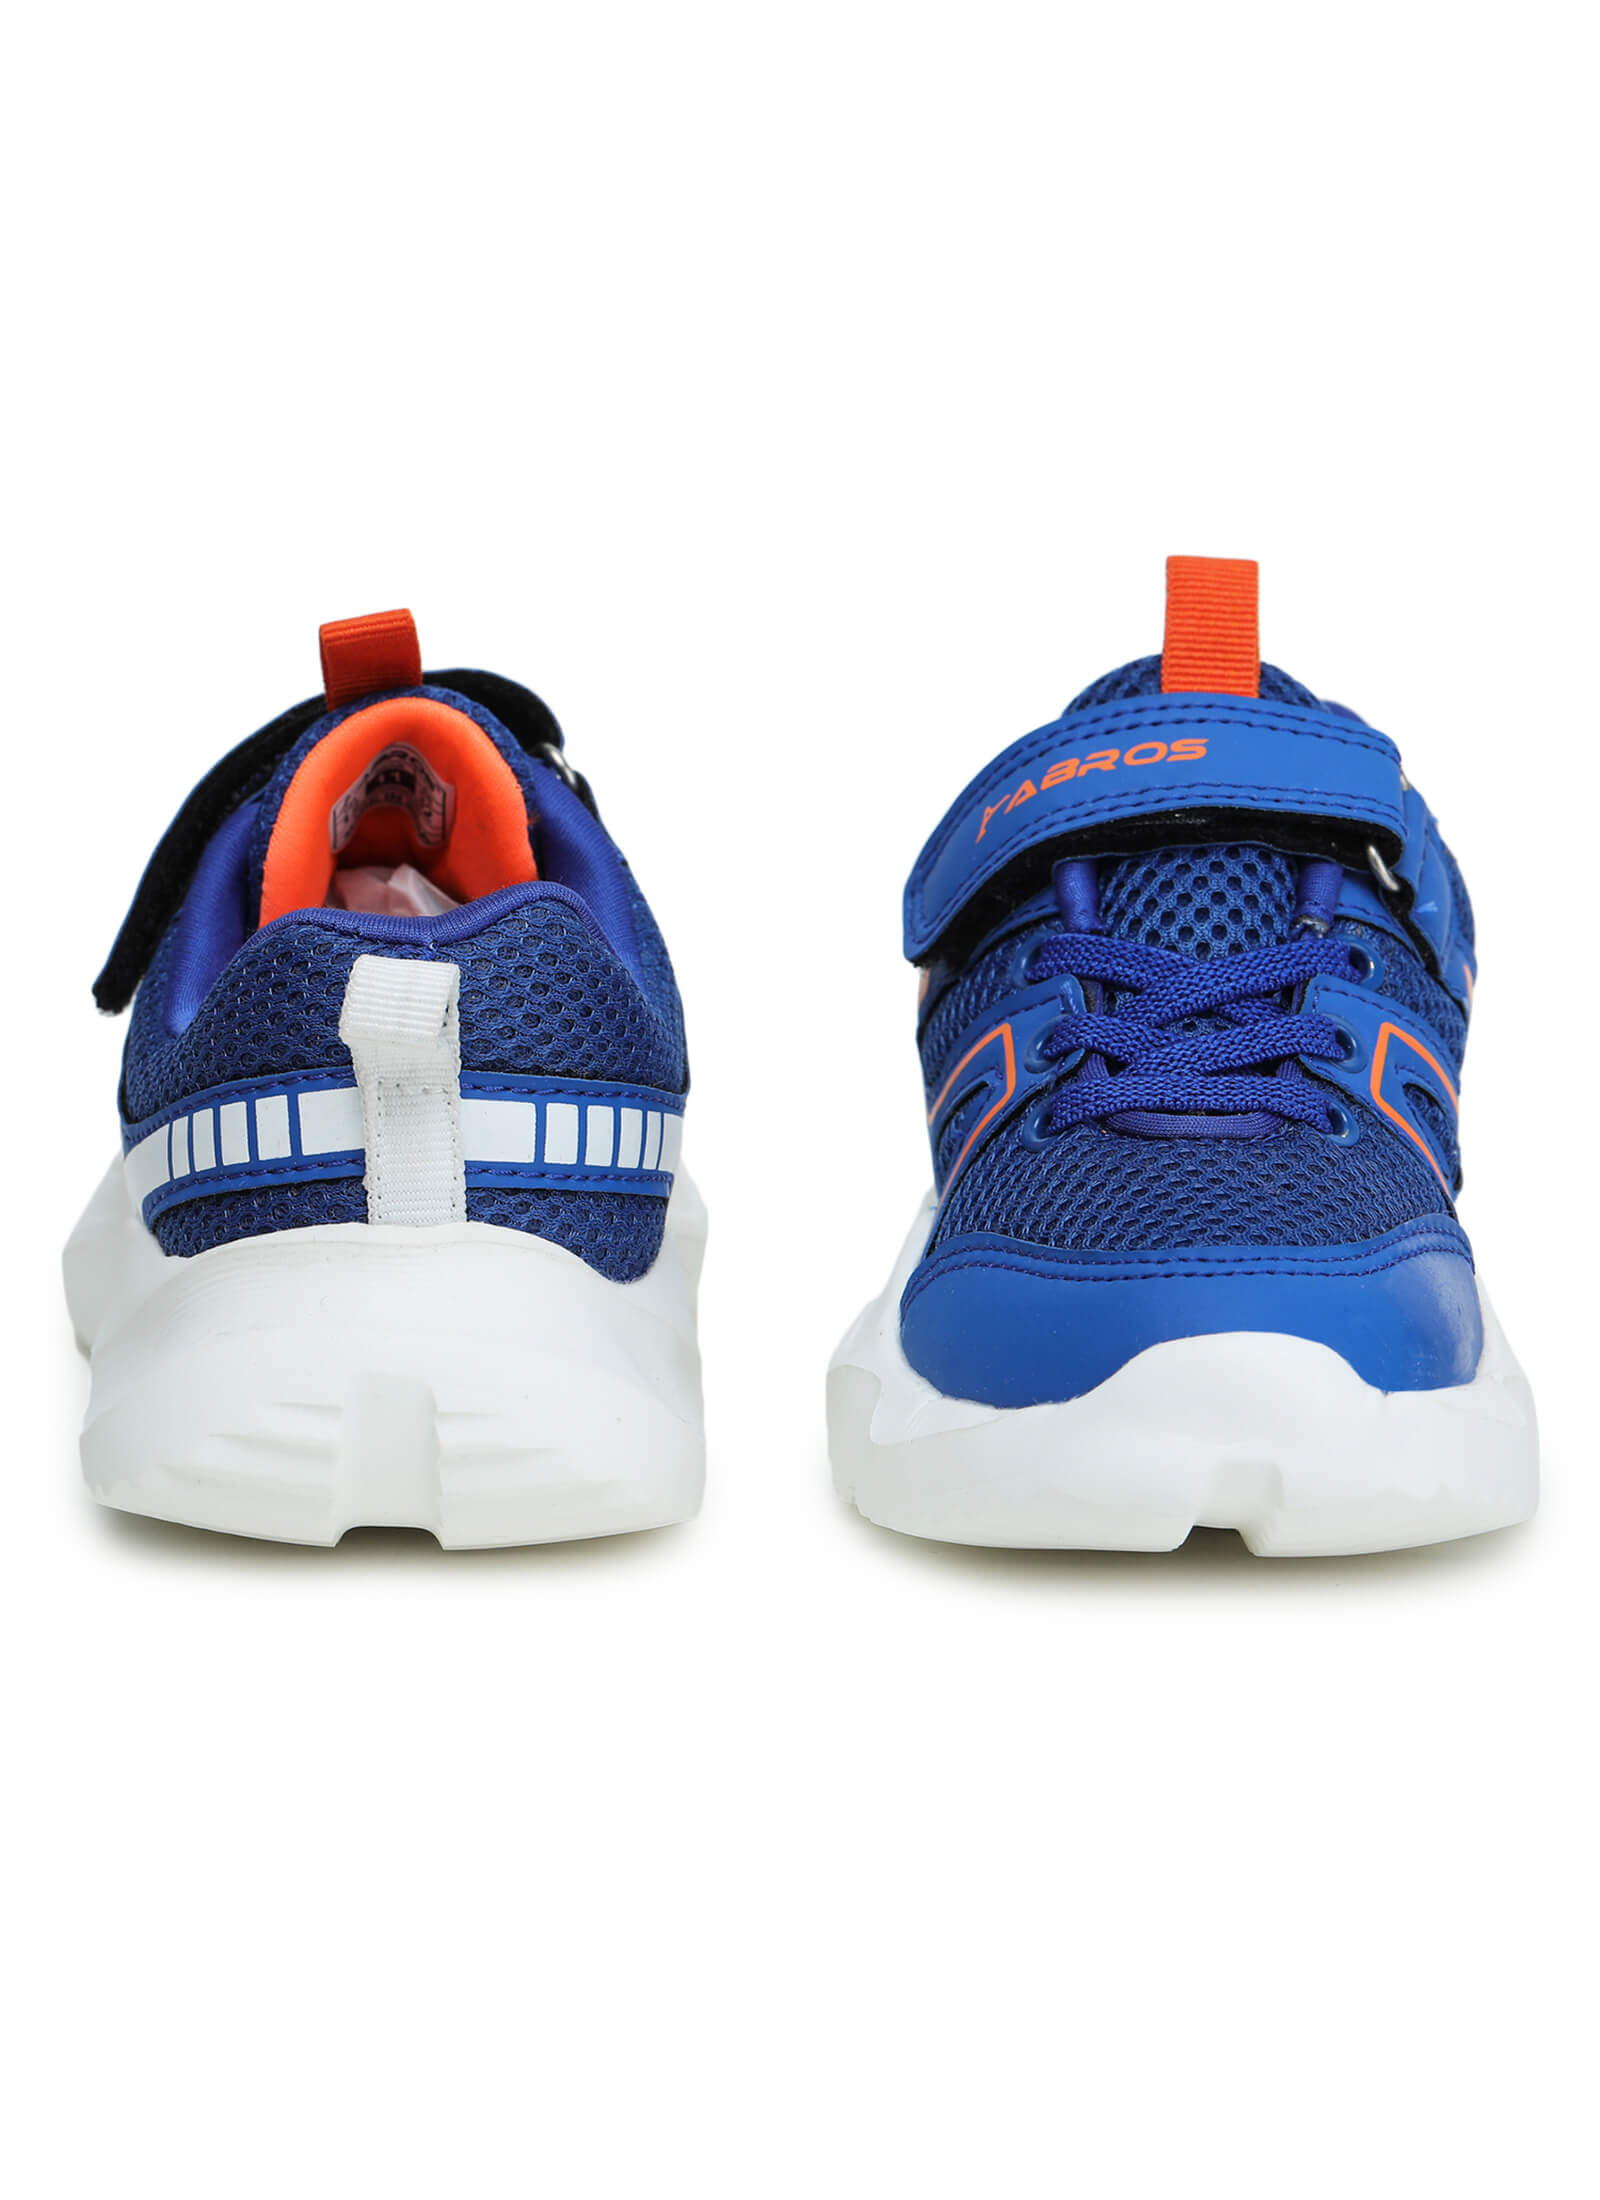 Fighter-N Sports Shoes for Kids